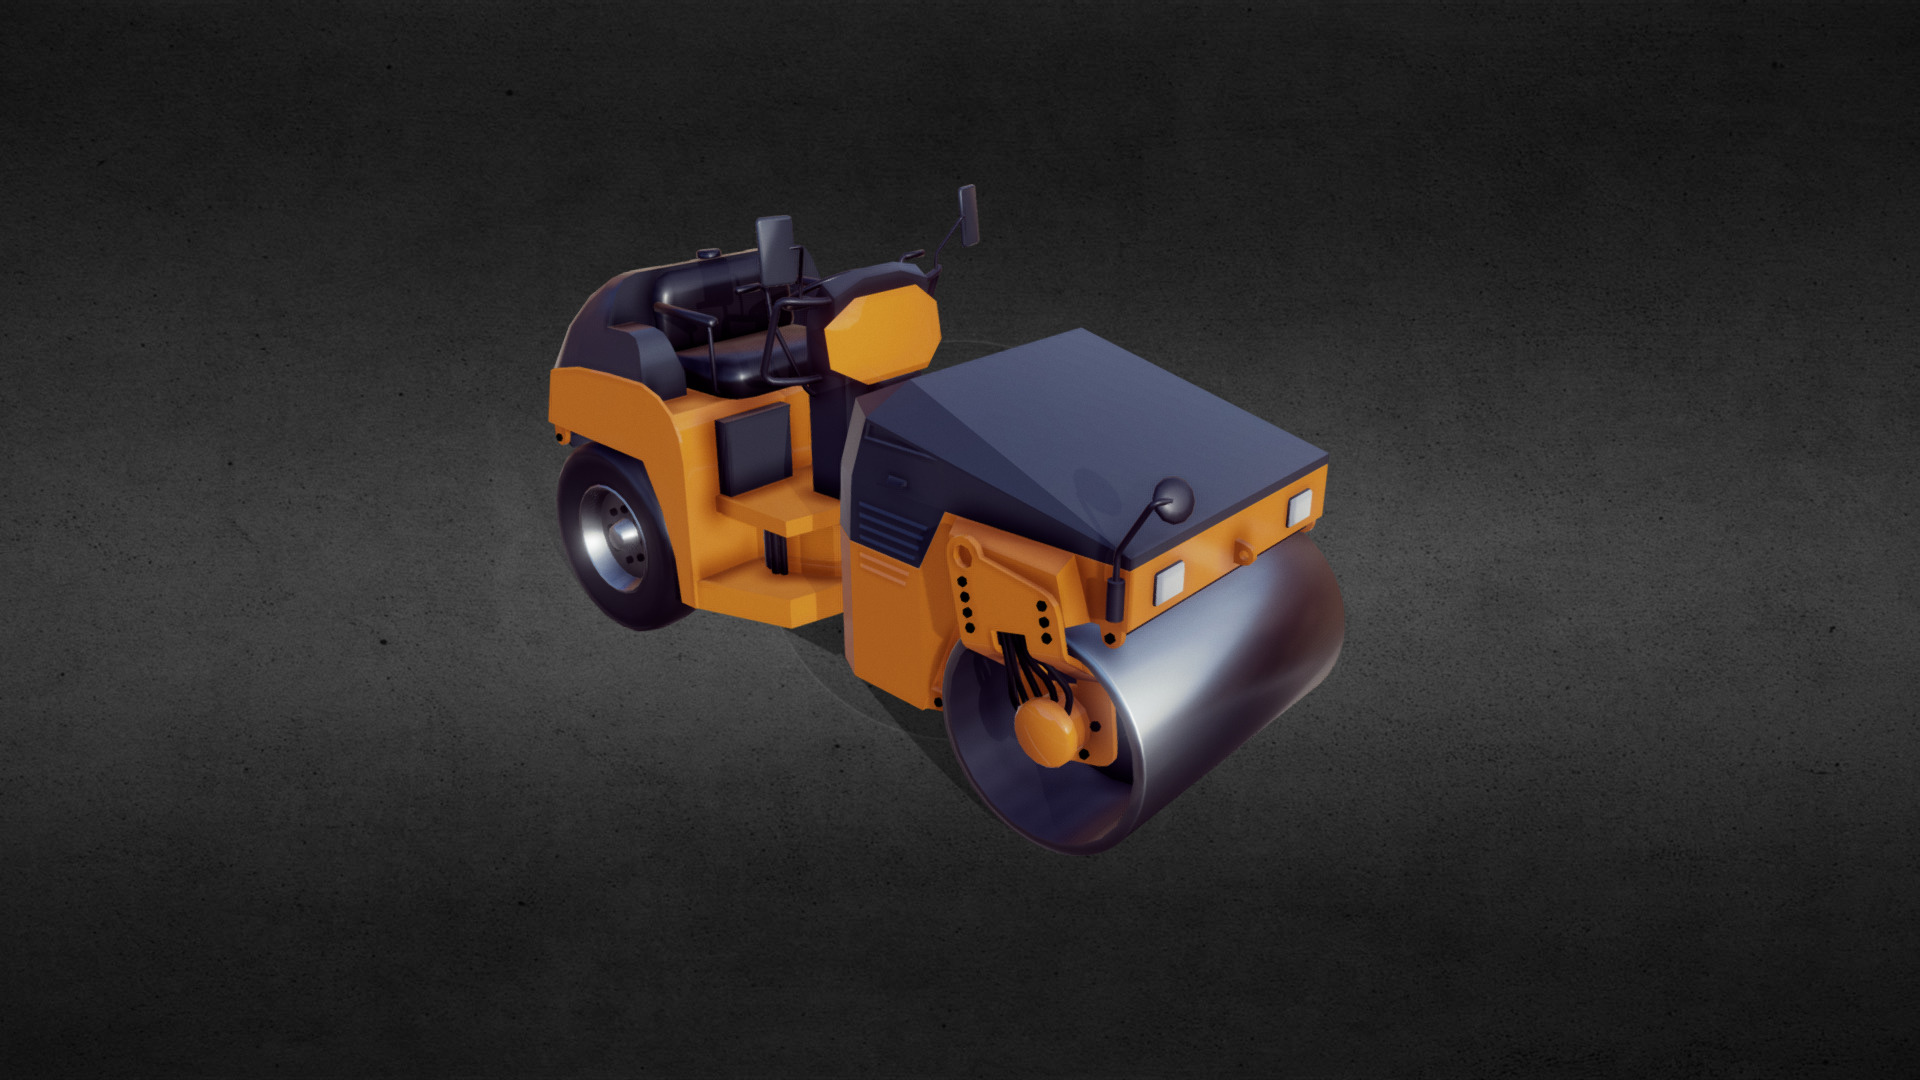 3D model road roller - This is a 3D model of the road roller. The 3D model is about a toy car on a surface.